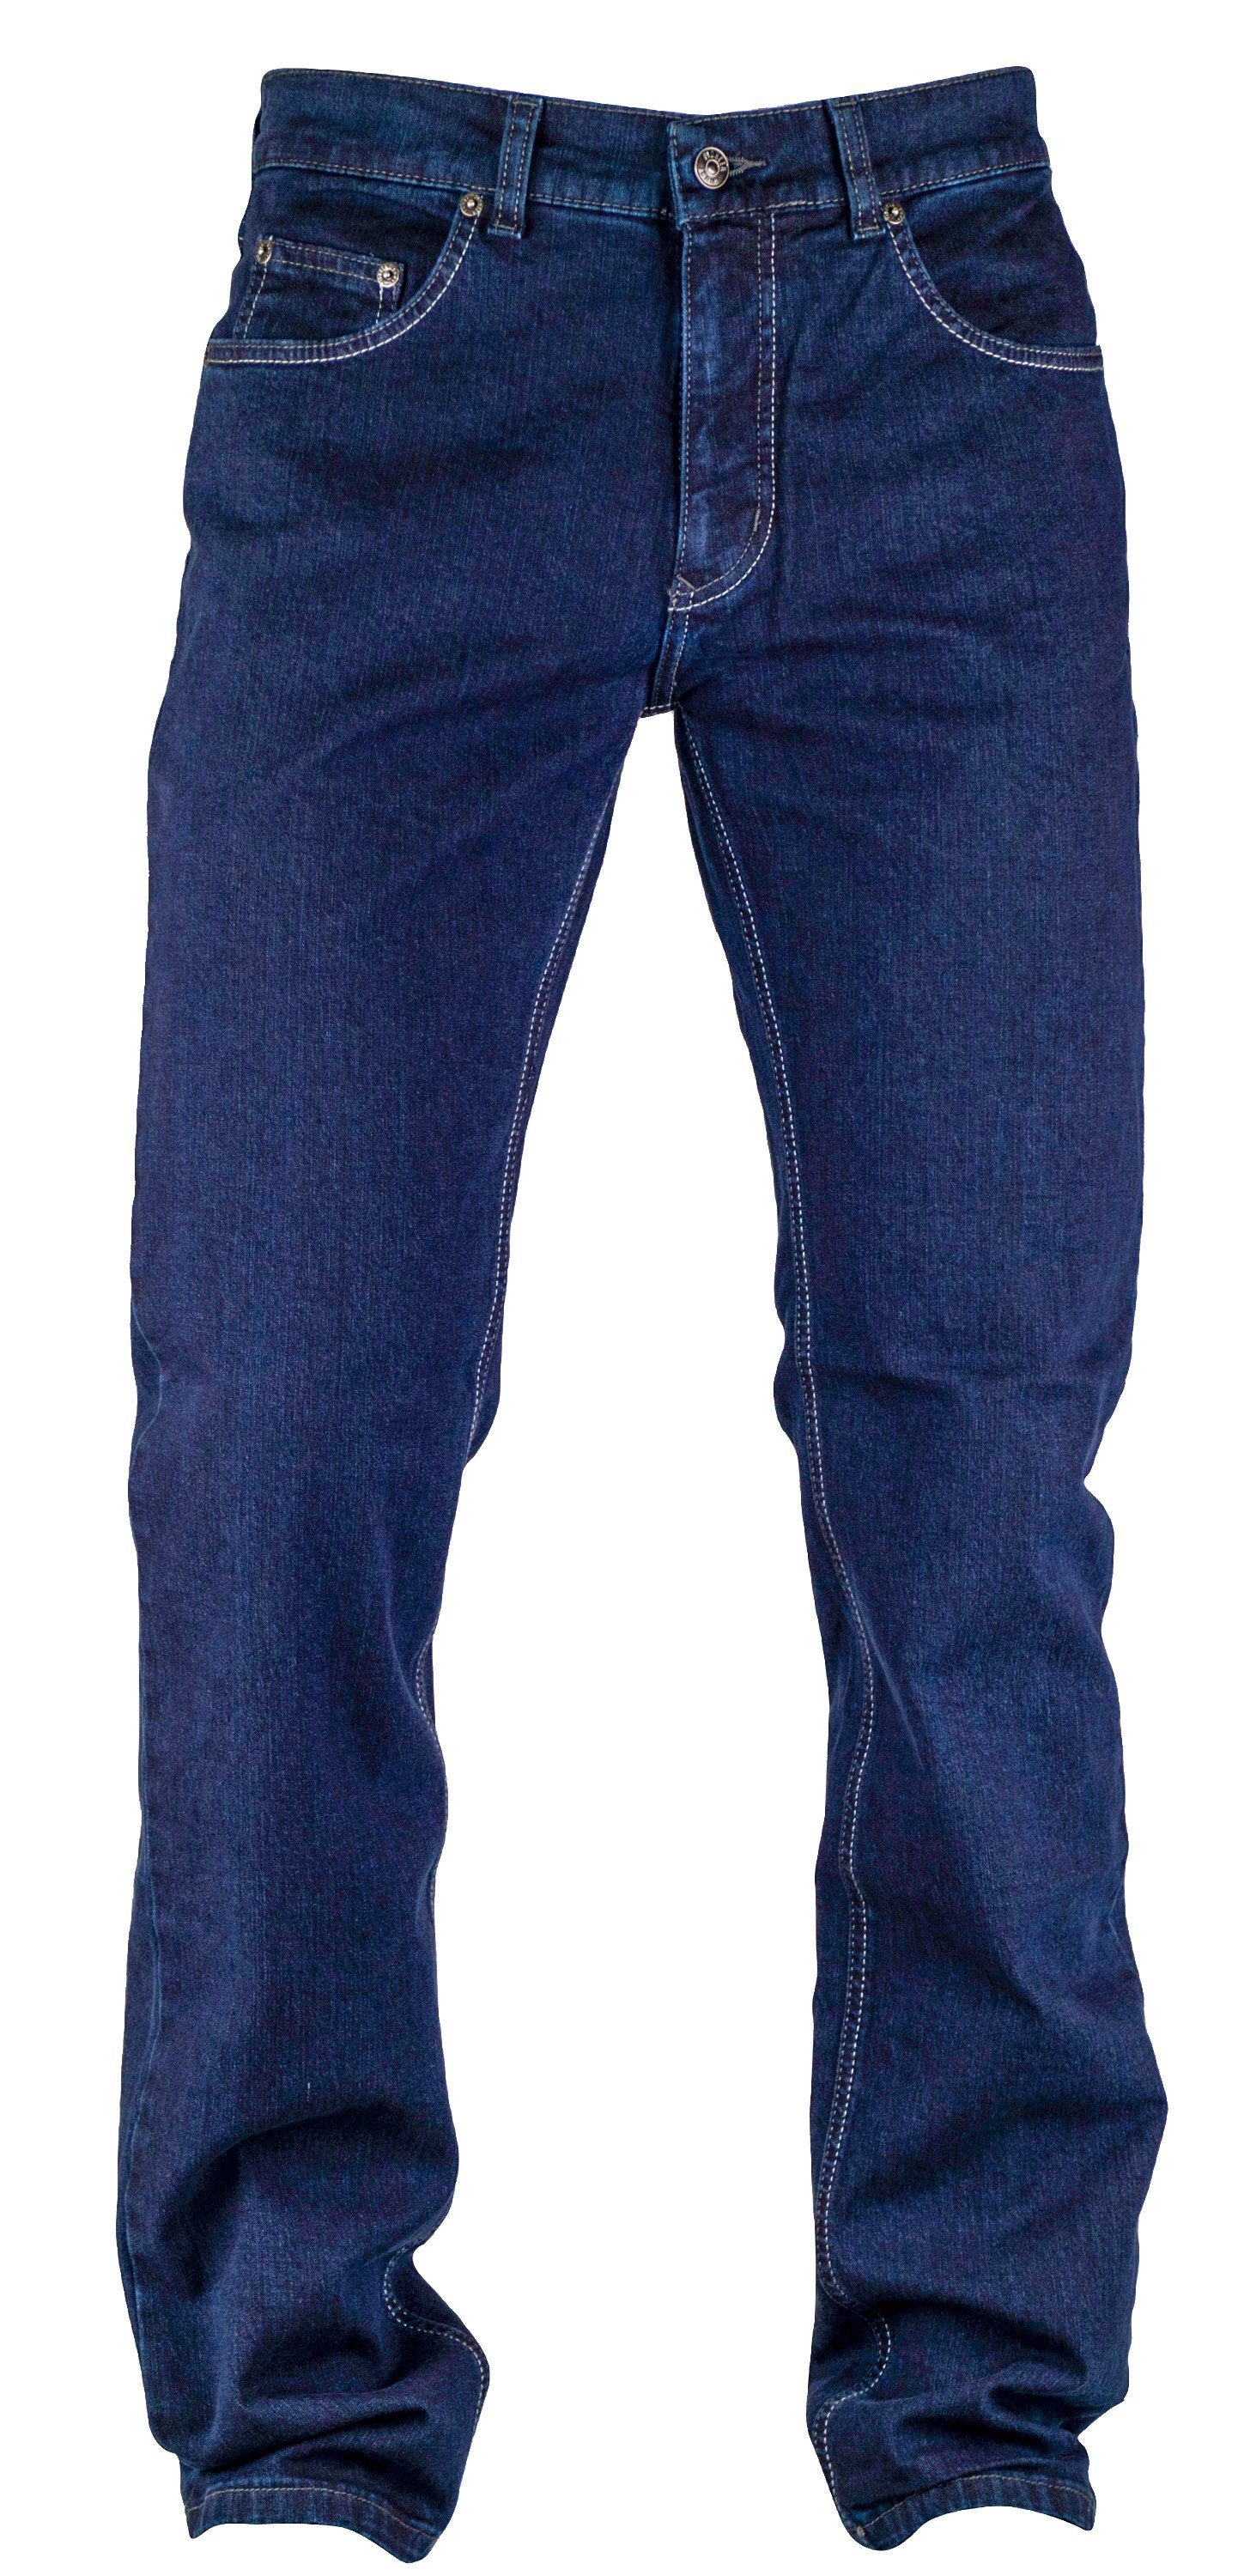 Pioneer Authentic Jeans 5-Pocket-Jeans PIONEER RON blue black 1144 9638.02